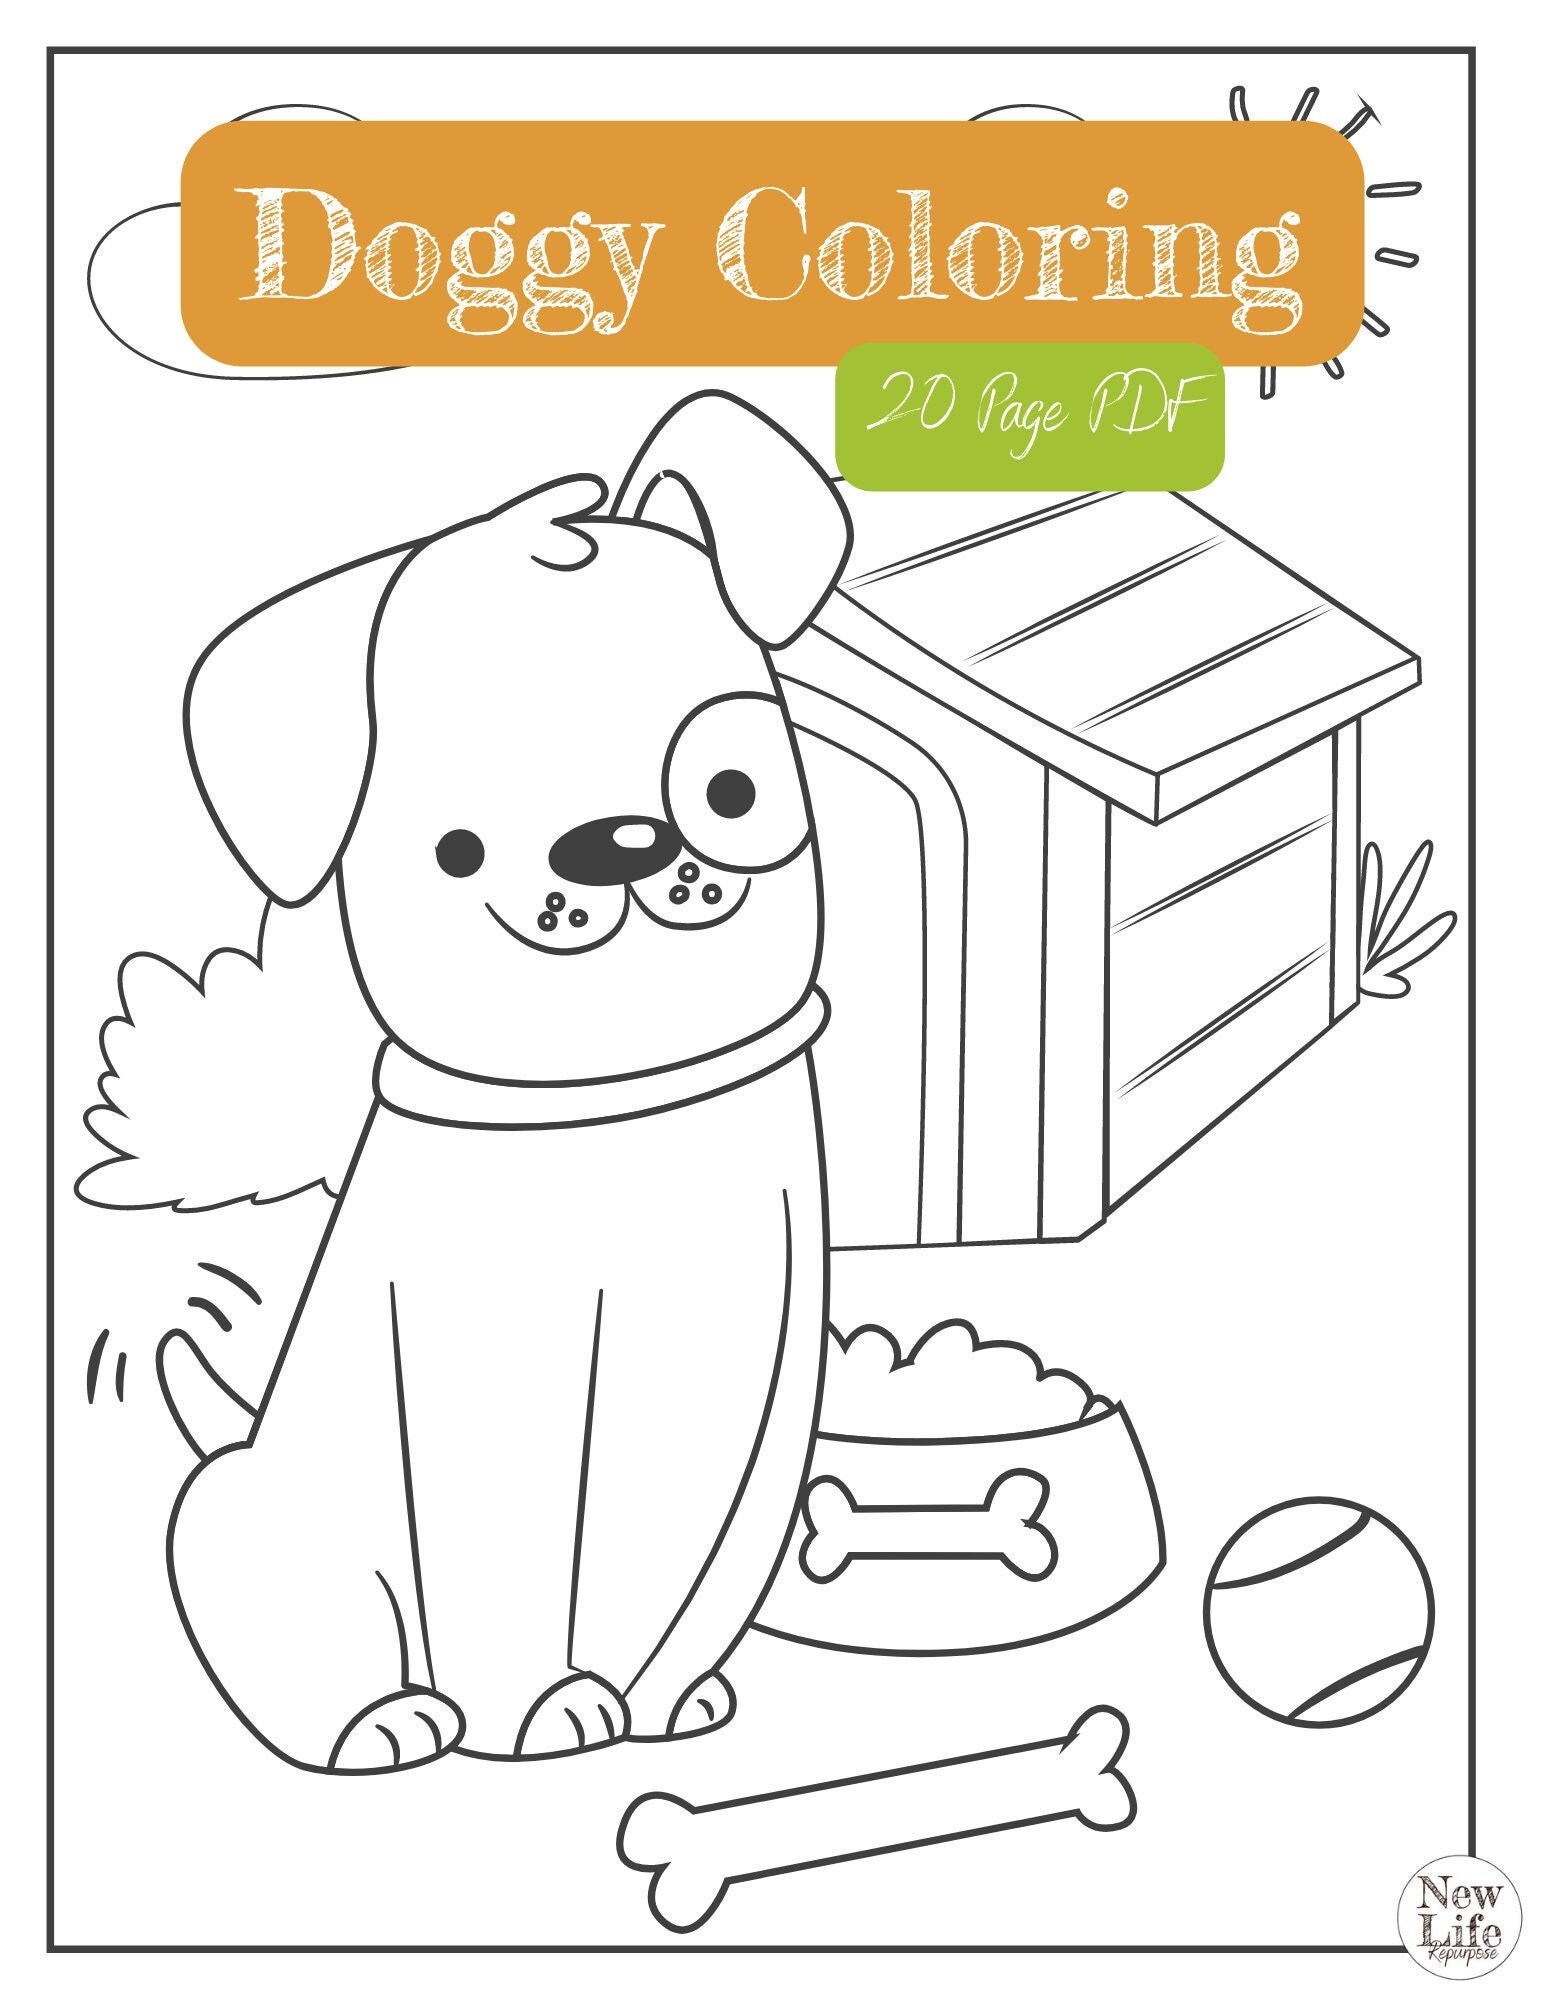 Printabledigital download dog coloring pages pages kids coloring activity download now